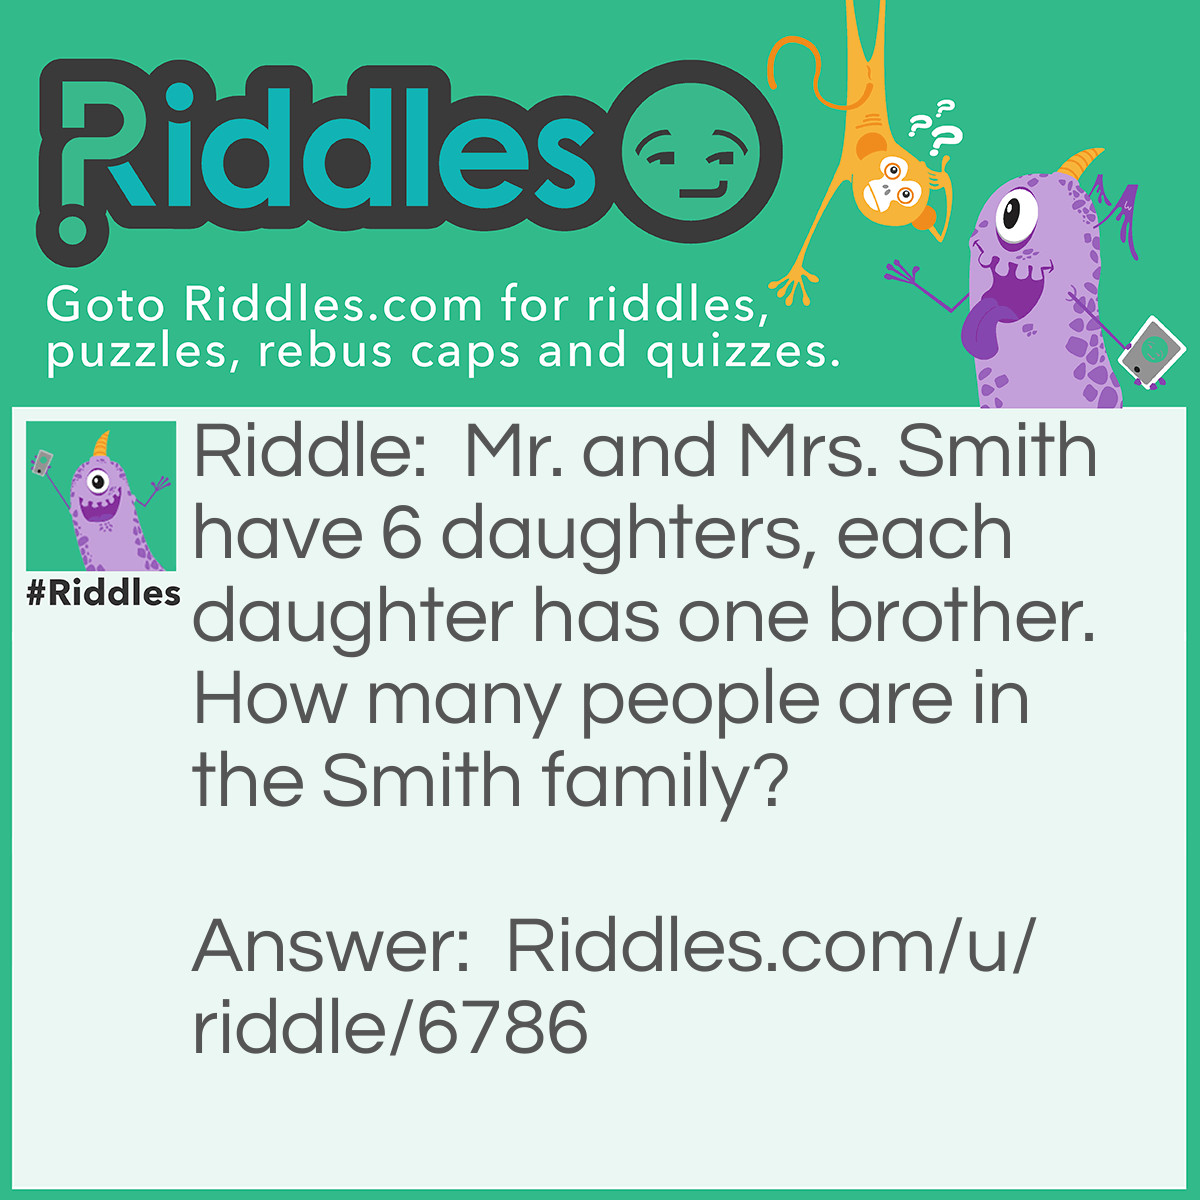 Riddle: Mr. and Mrs. Smith have 6 daughters, each daughter has one brother. How many people are in the Smith family? Answer: 9 (Mrs. Smith, Mr. Smith, the 6 daughter and the brother they share)